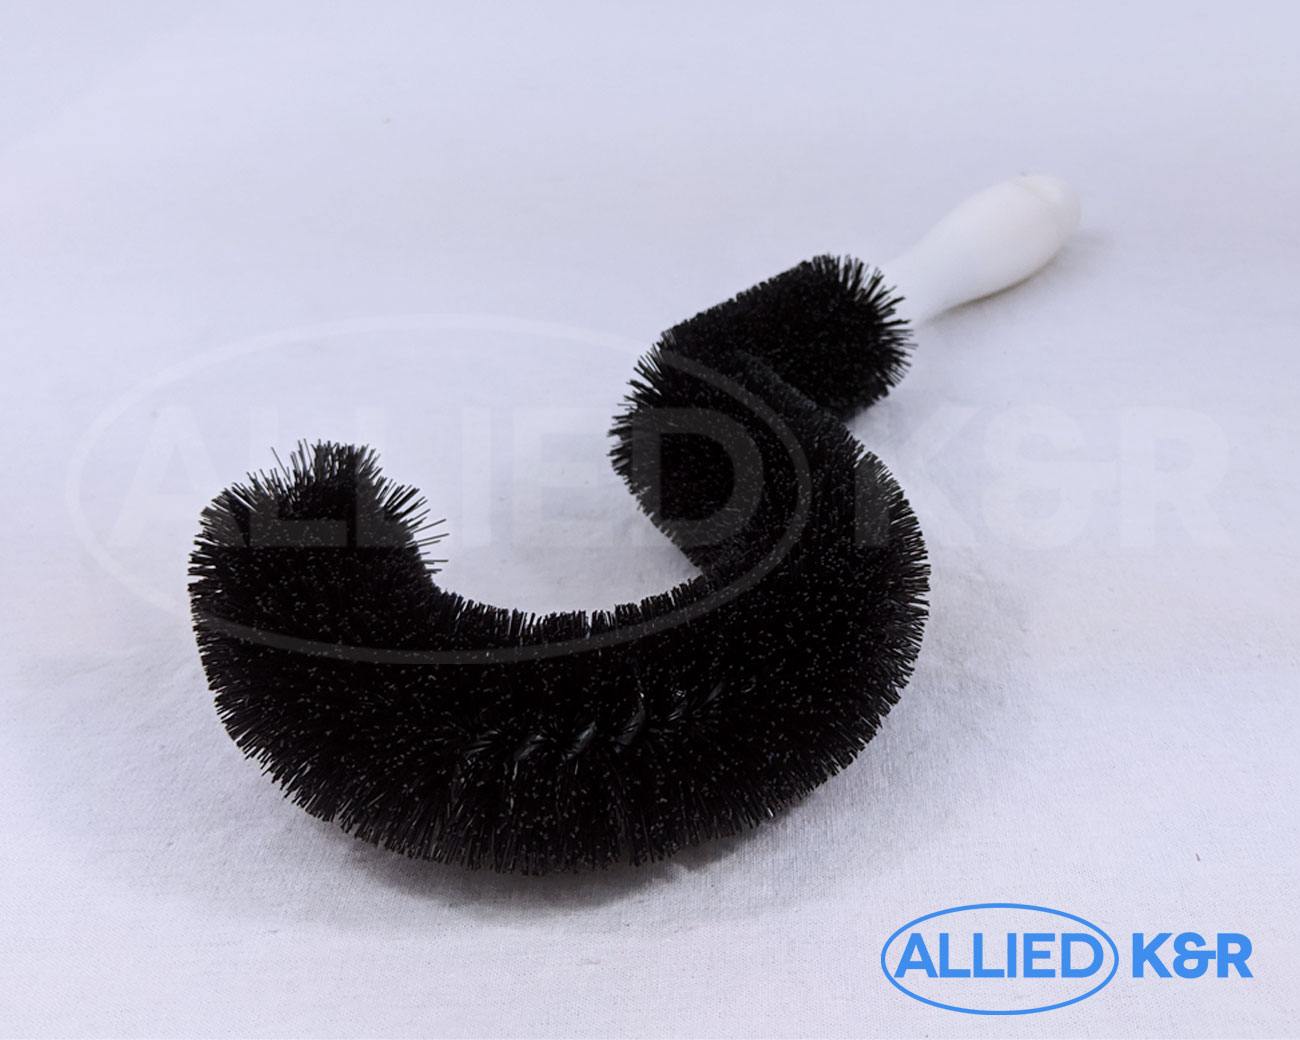 https://alliedkr.com/siteber/wp-content/gallery/950298/Coffee-maker-brush-polyester-handle-950298-front.jpg